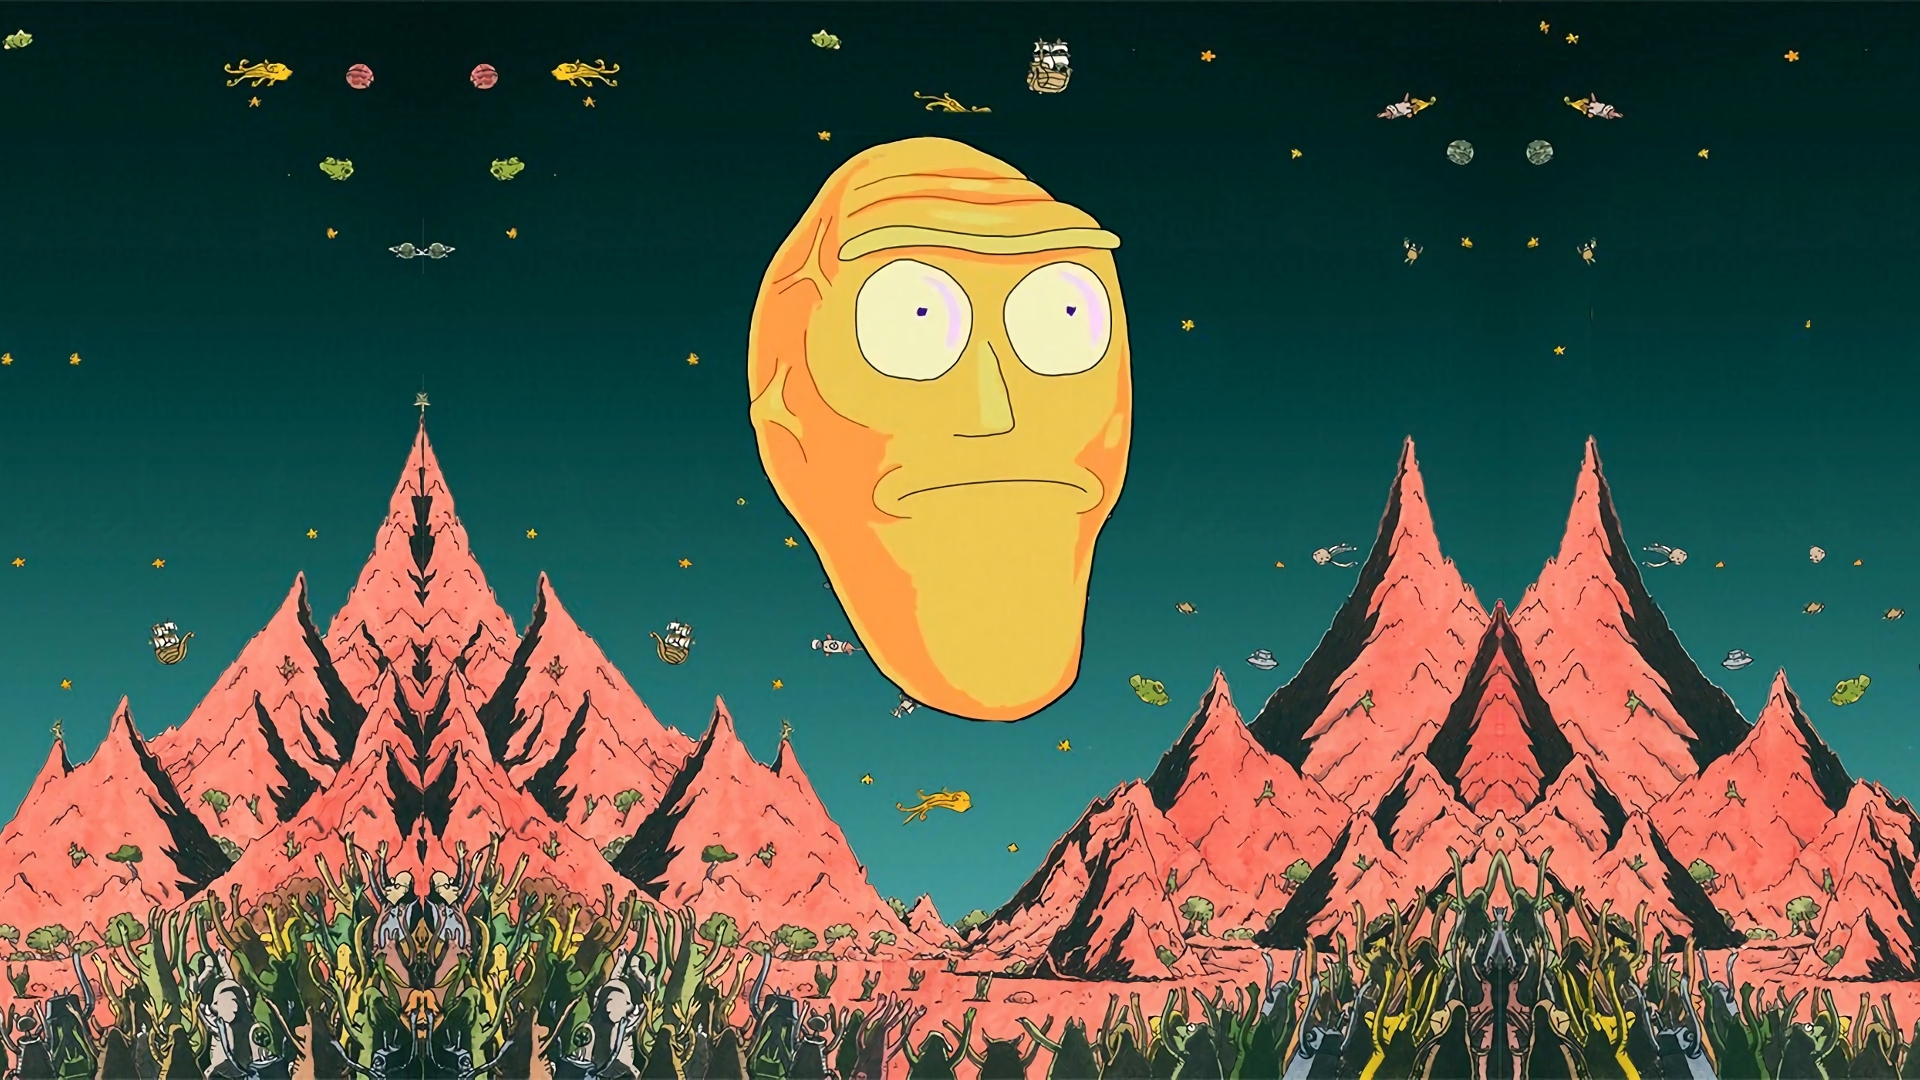 Rick and Morty 1080p Wallpapers.